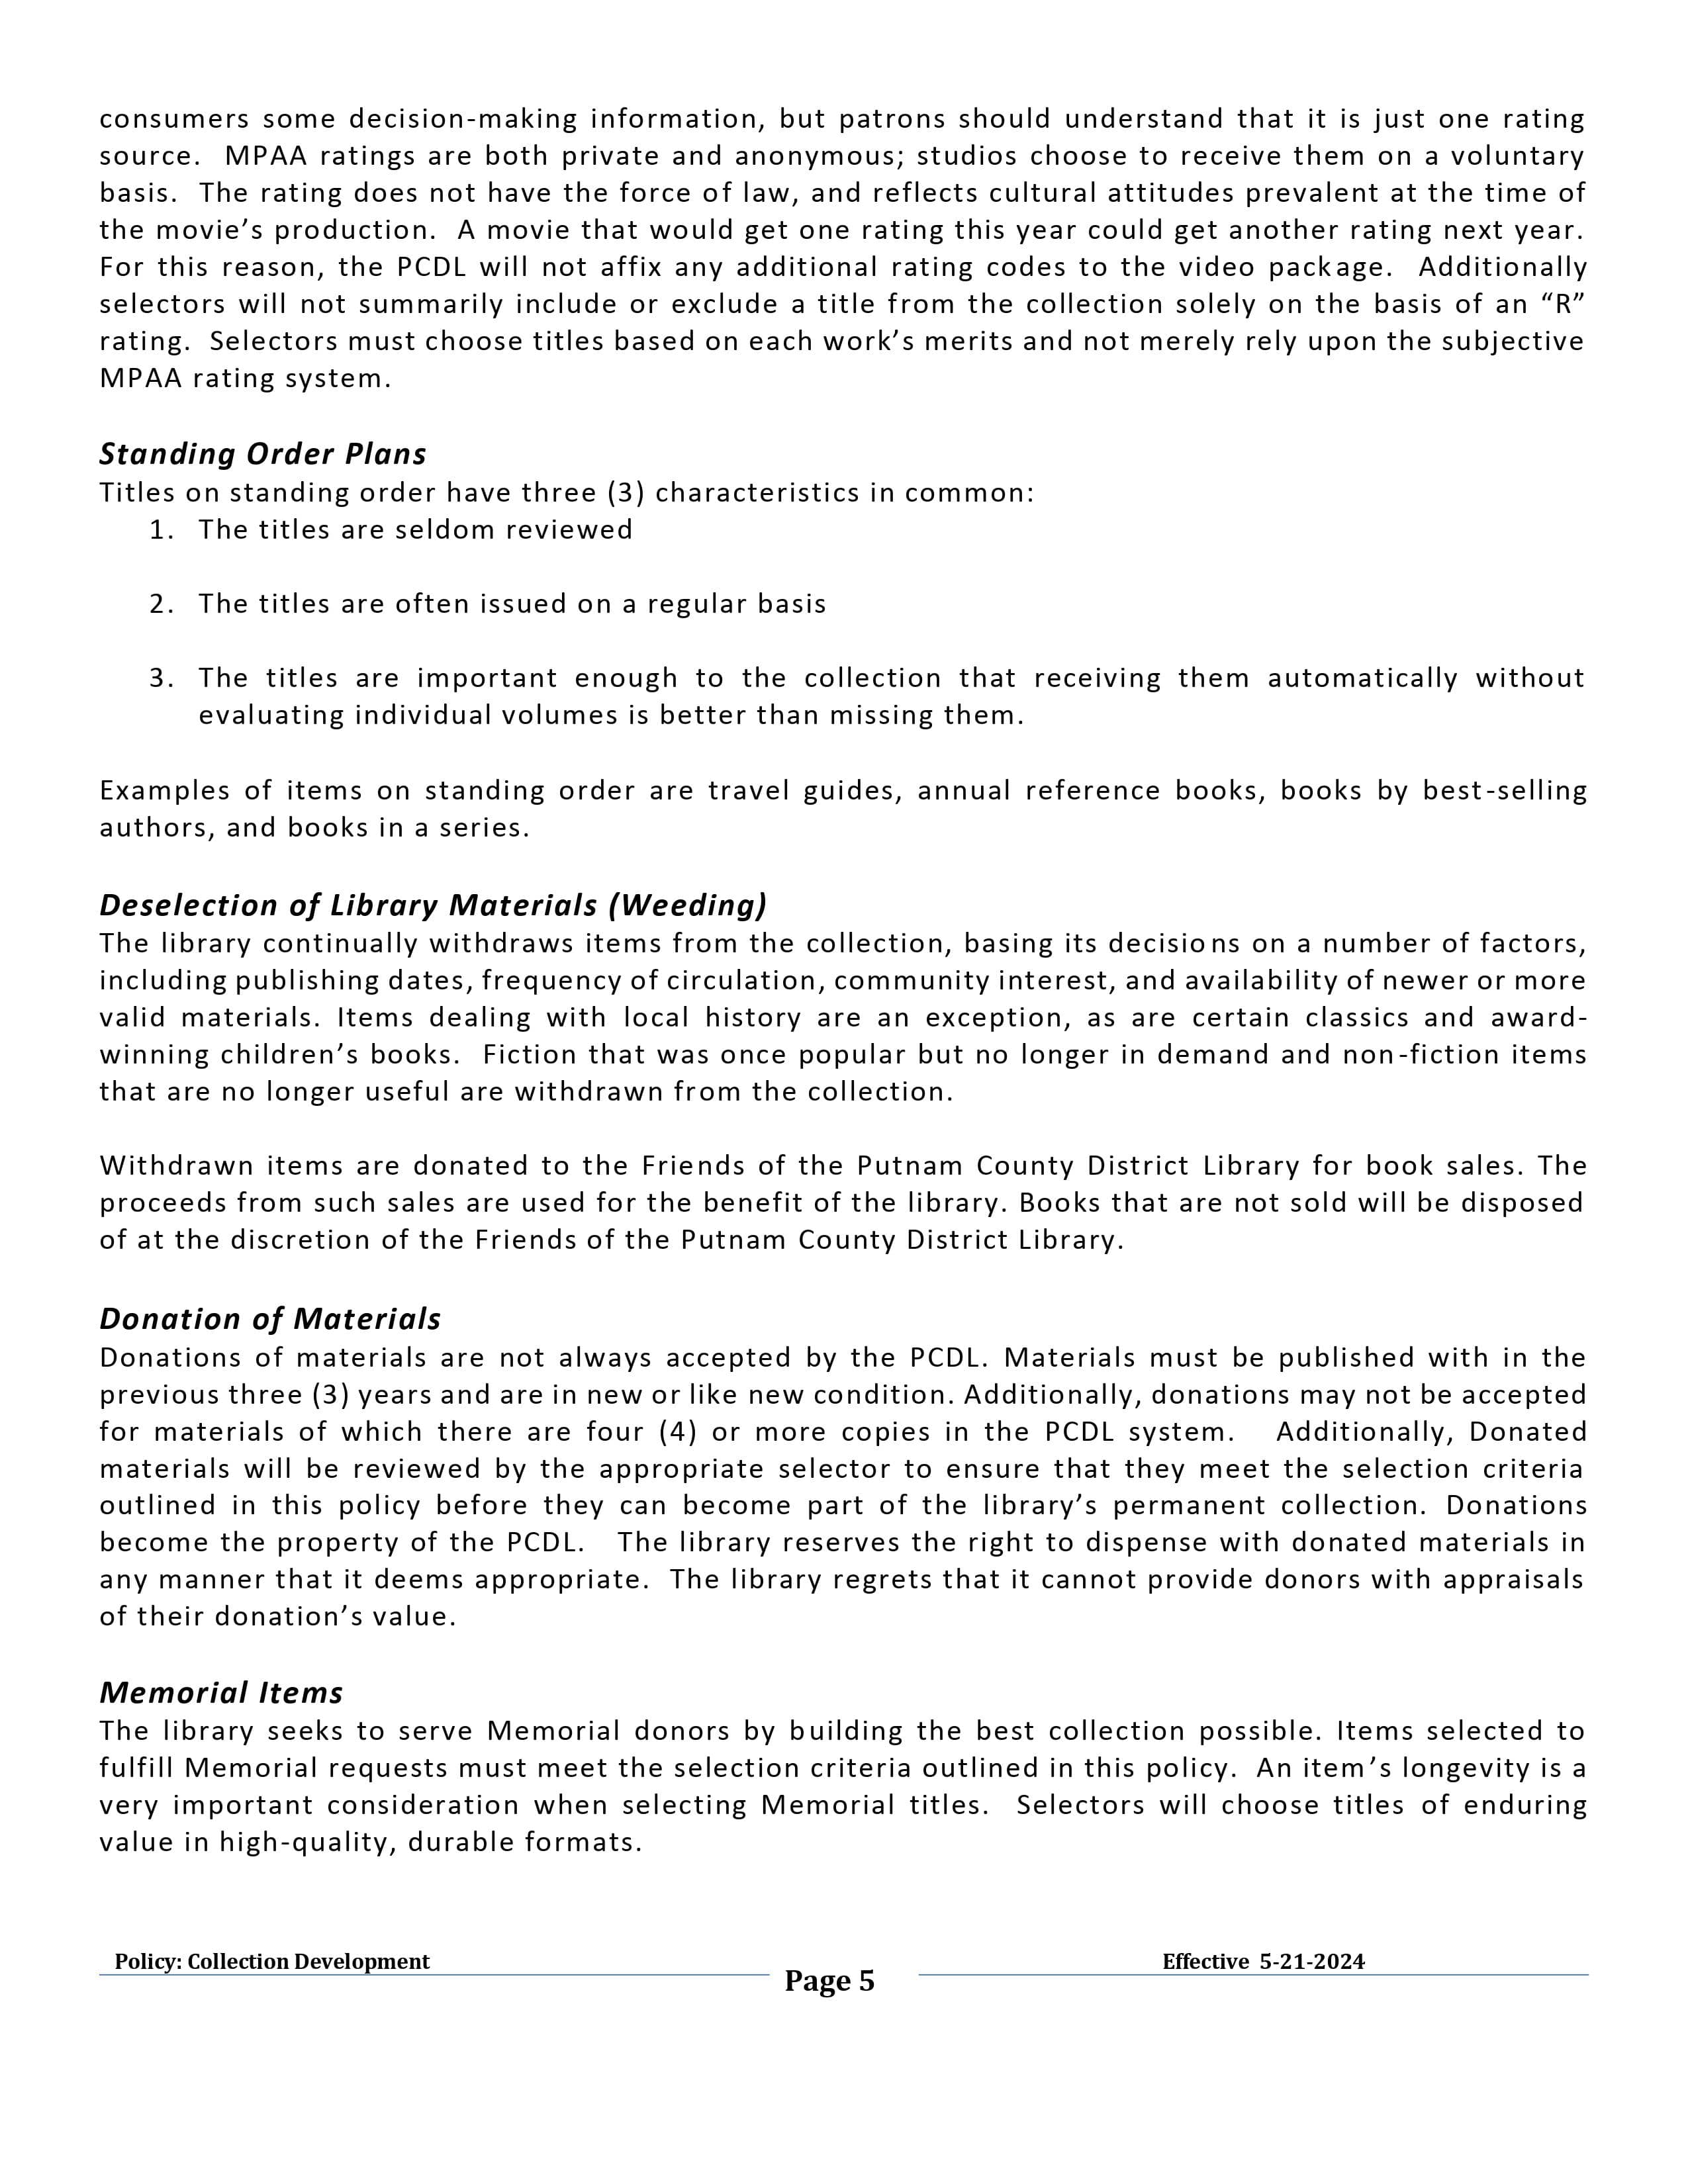 Collection Development Policy Page 5